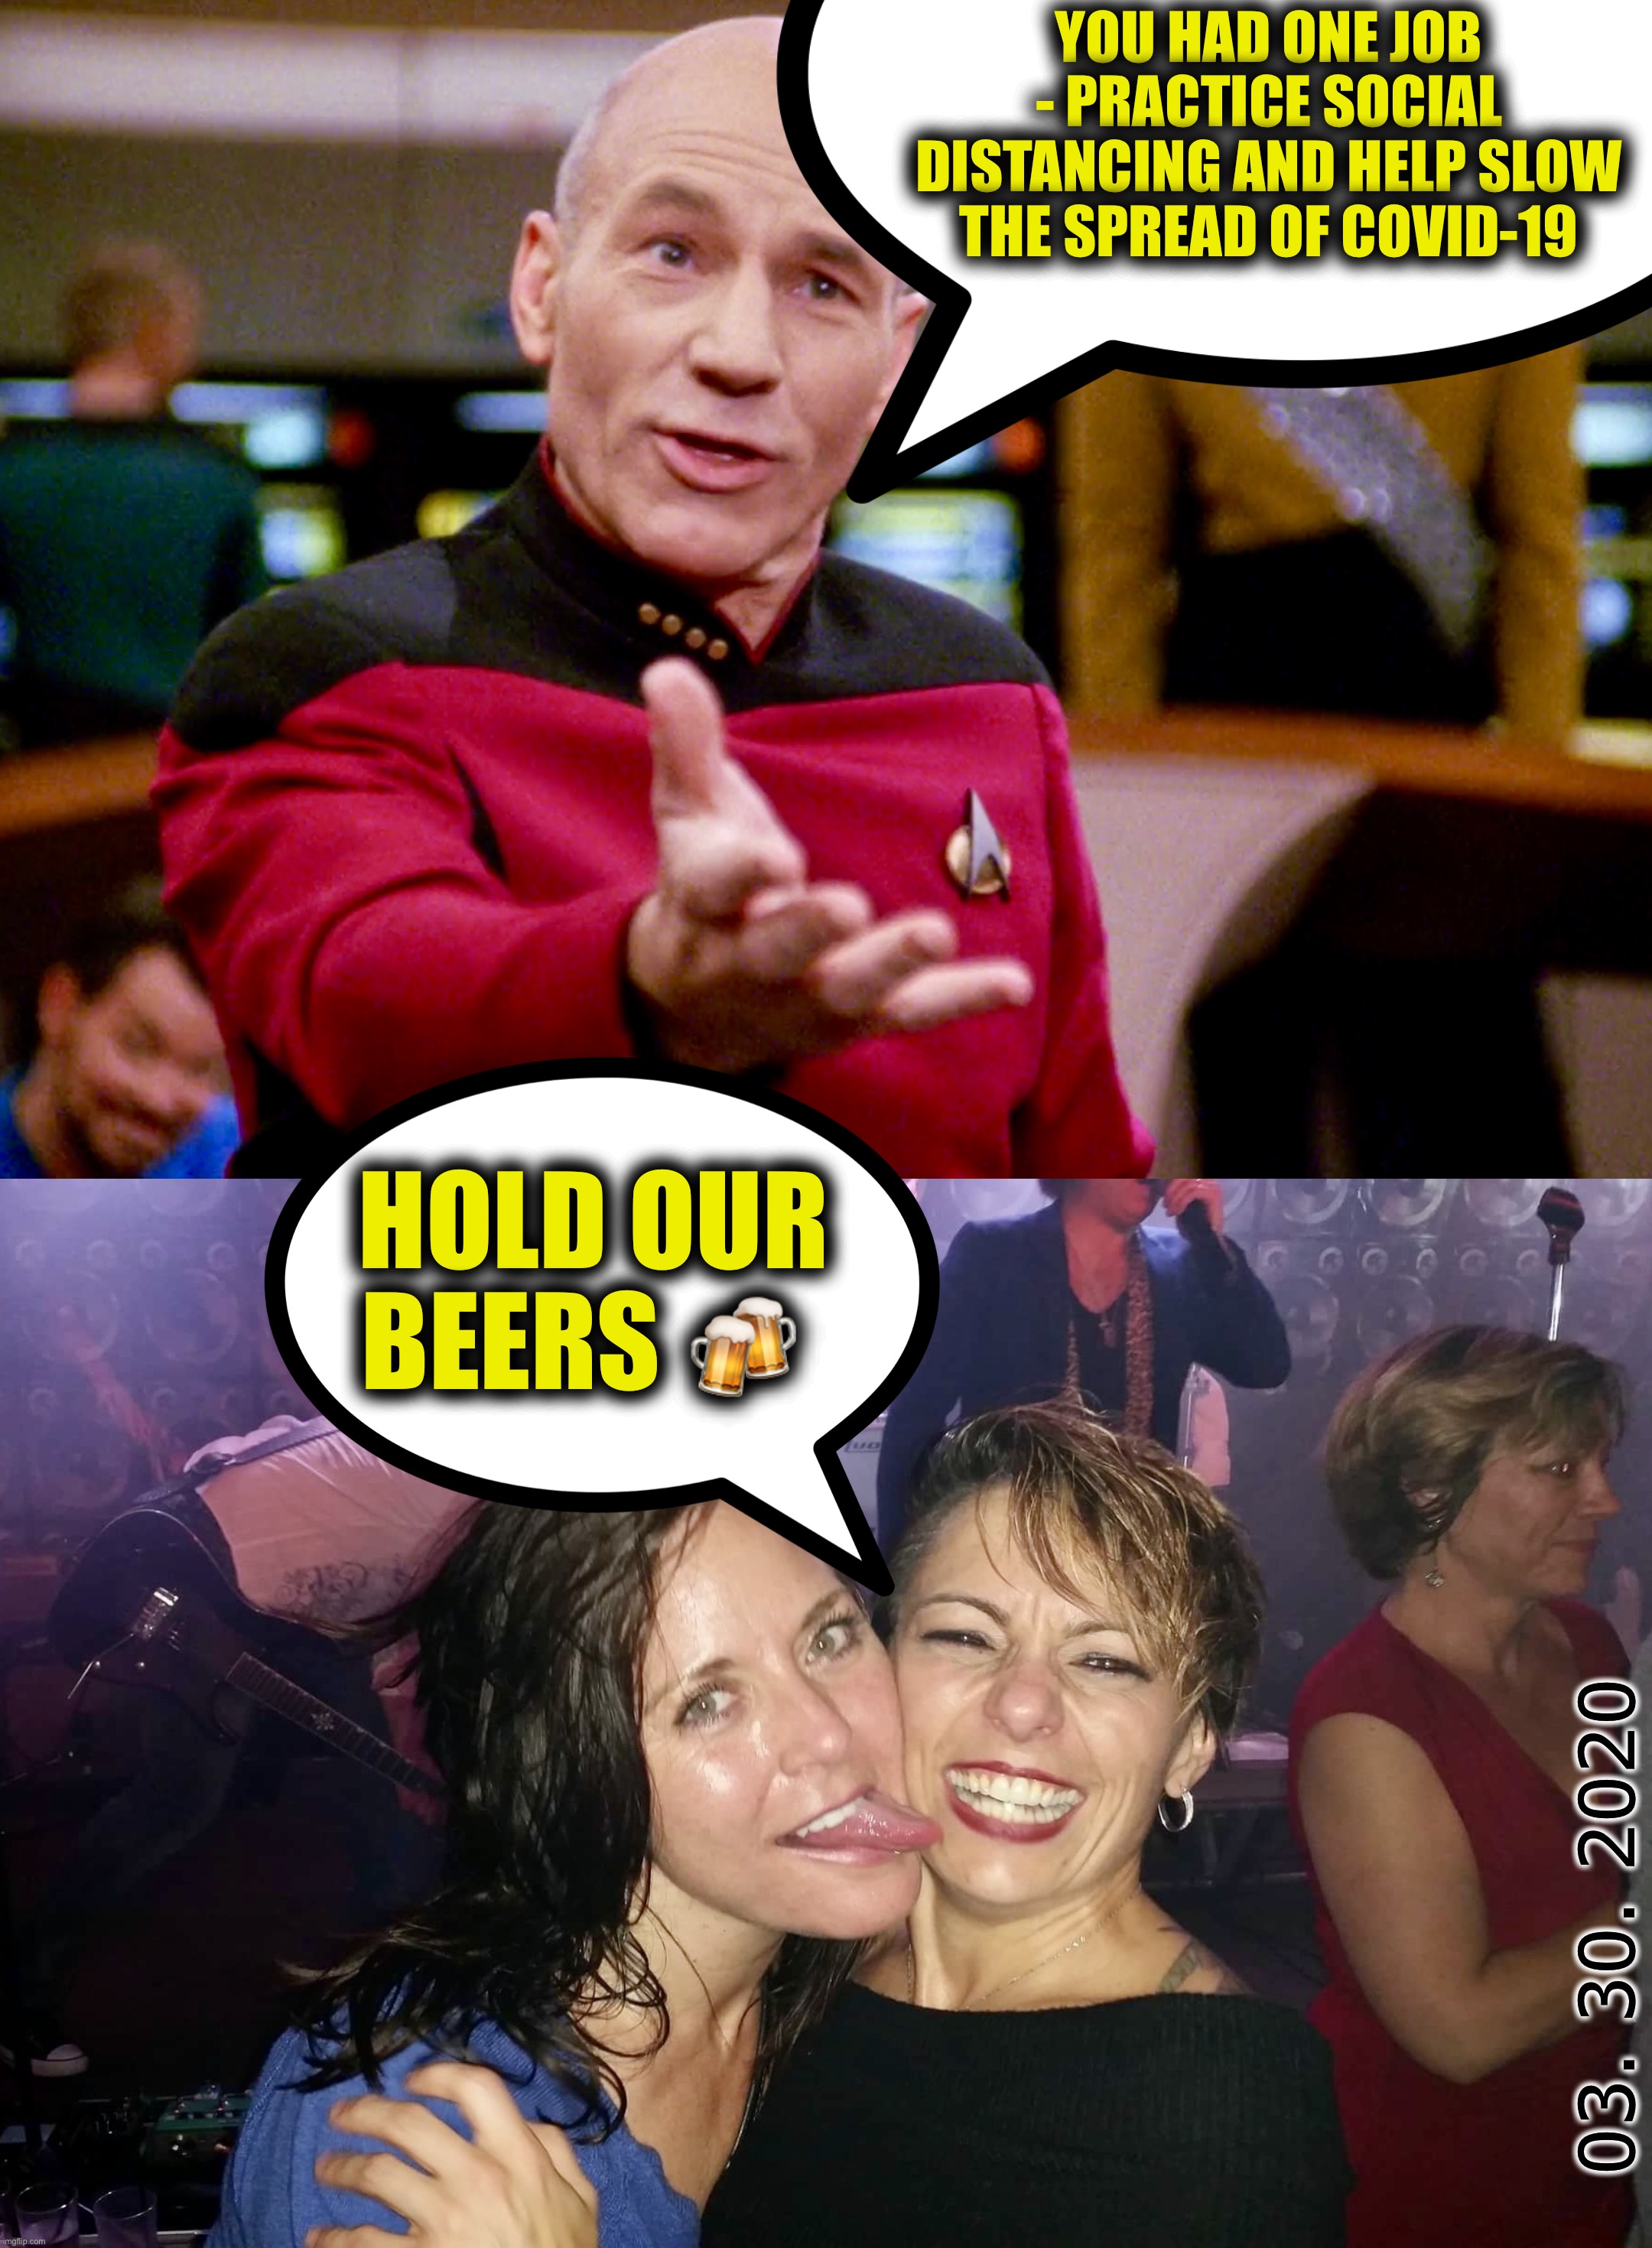 CoronaCrazy | YOU HAD ONE JOB - PRACTICE SOCIAL DISTANCING AND HELP SLOW THE SPREAD OF COVID-19; HOLD OUR BEERS 🍻; 03. 30. 2020 | image tagged in star trek,covidiots,memes,hold my beer,coronavirus meme,social distancing | made w/ Imgflip meme maker